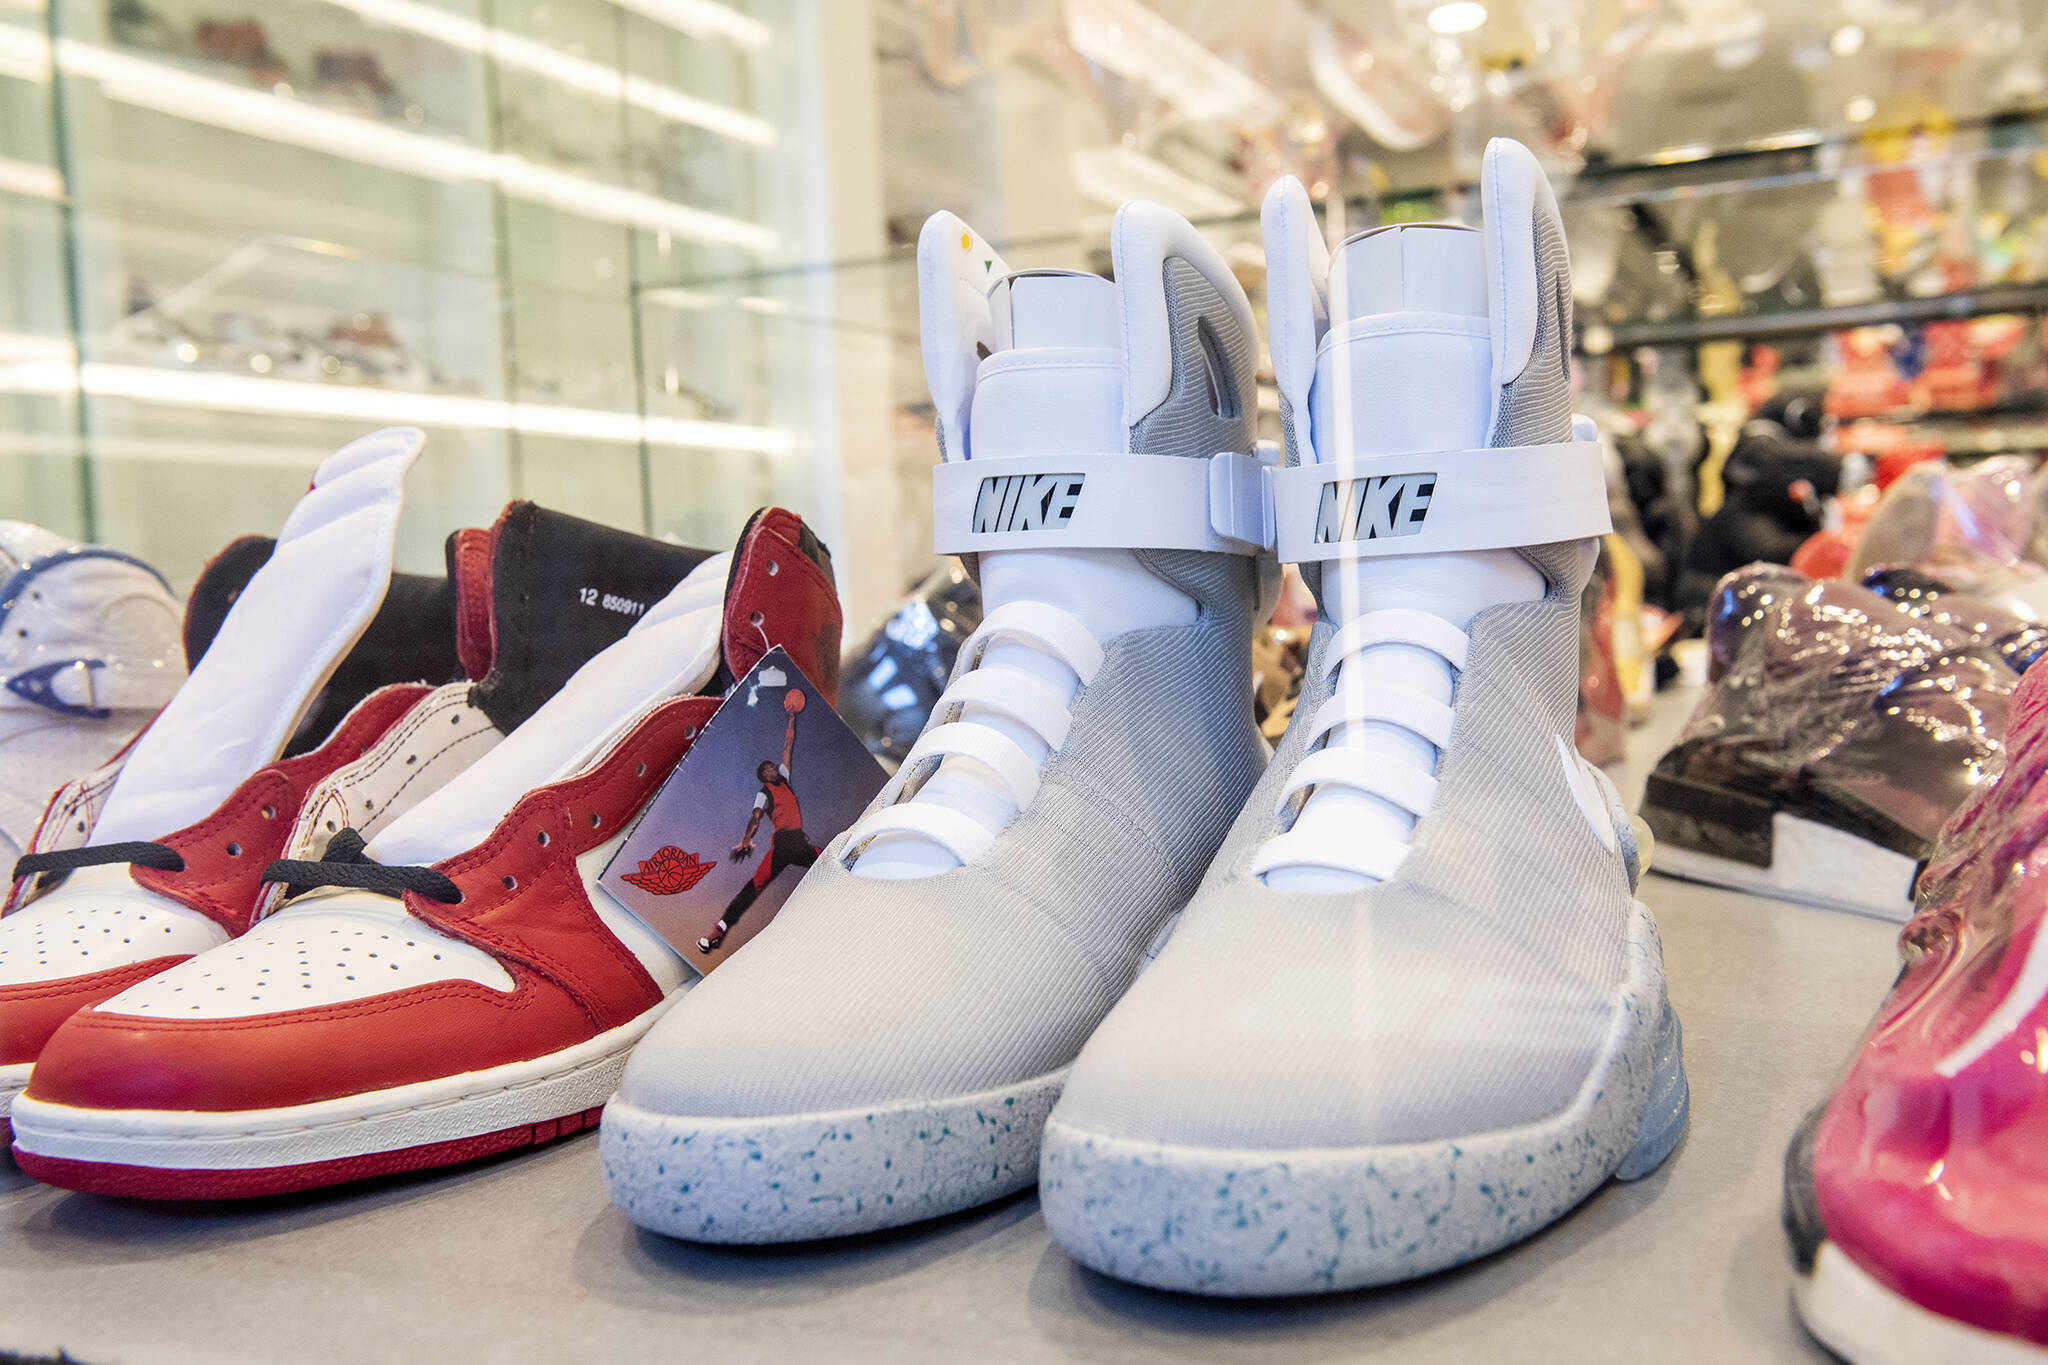 A Sneakerhead's Guide to NYC's Coolest Sneaker Stores, Local's Guide